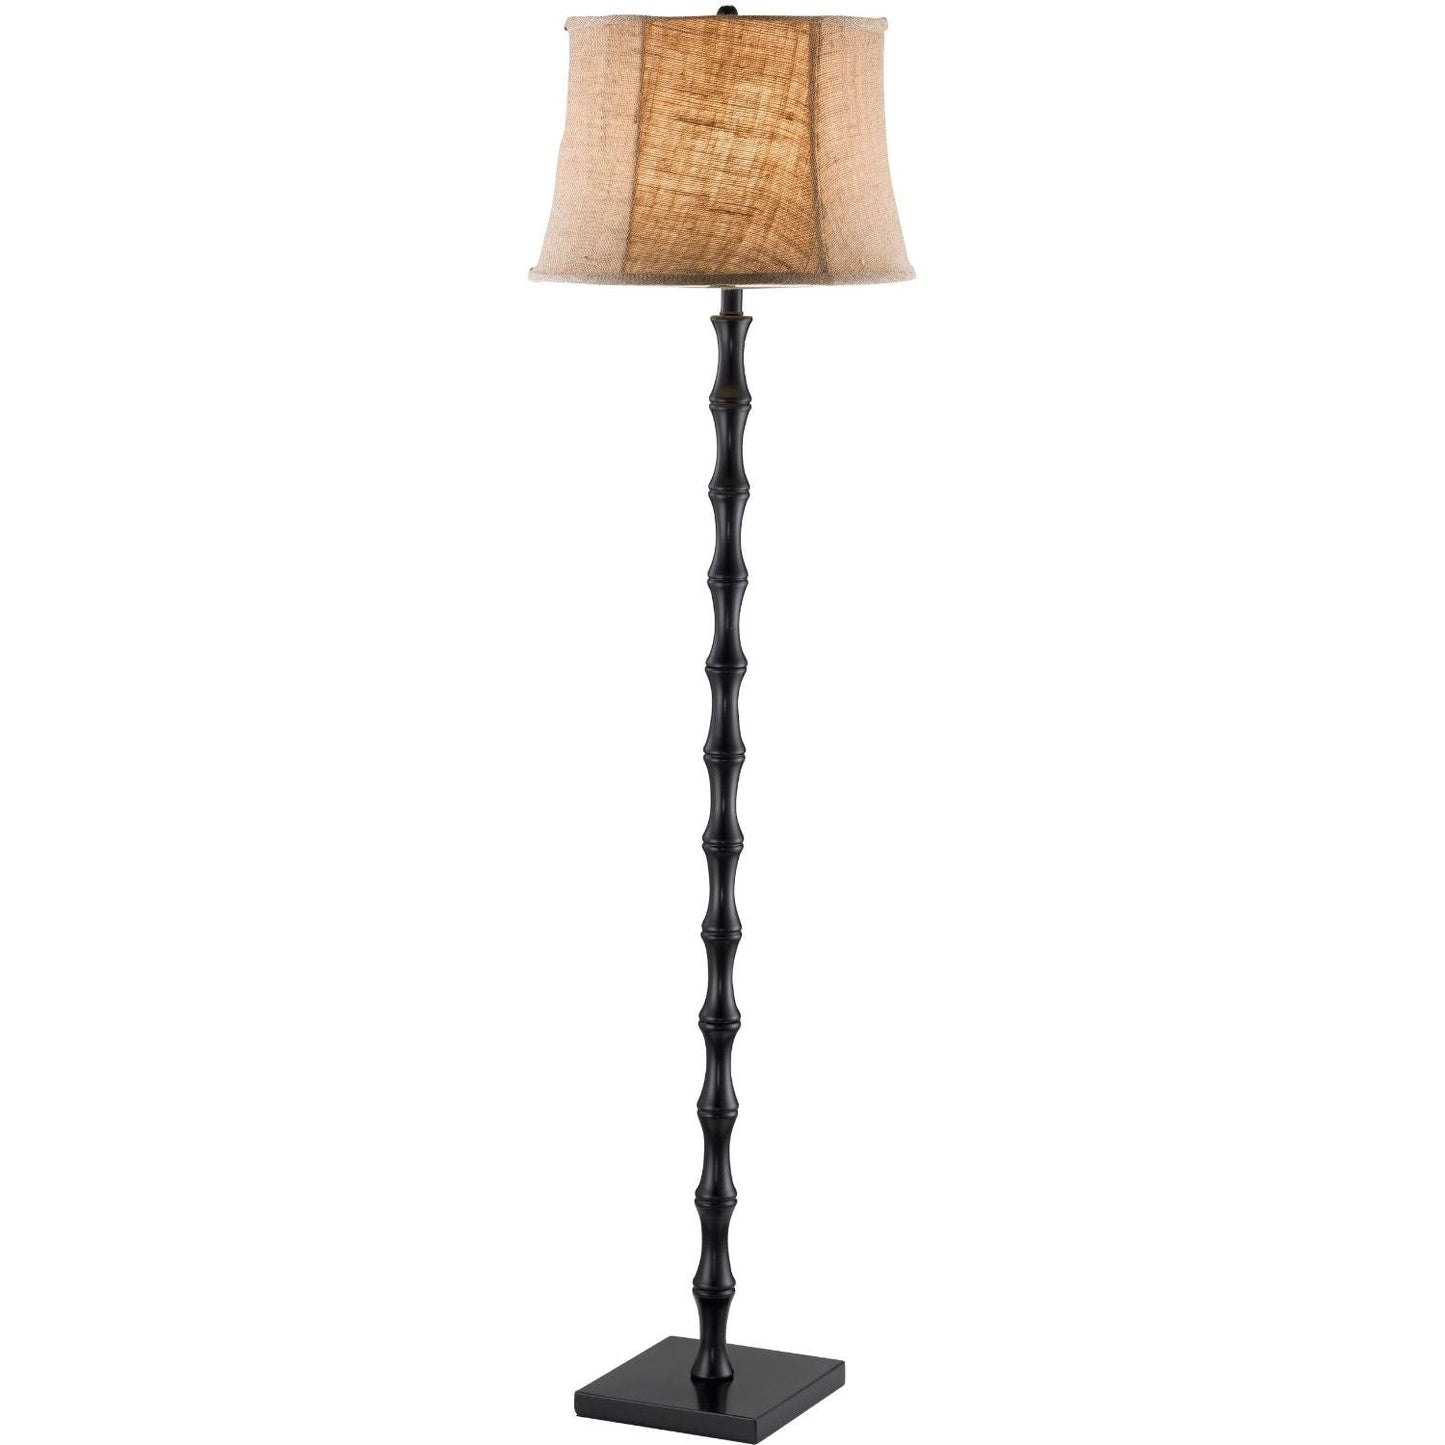 Lighting > Floor Lamps - Traditional Floor Lamp With Black Metal Pole And Brown Burlap Bell Shade